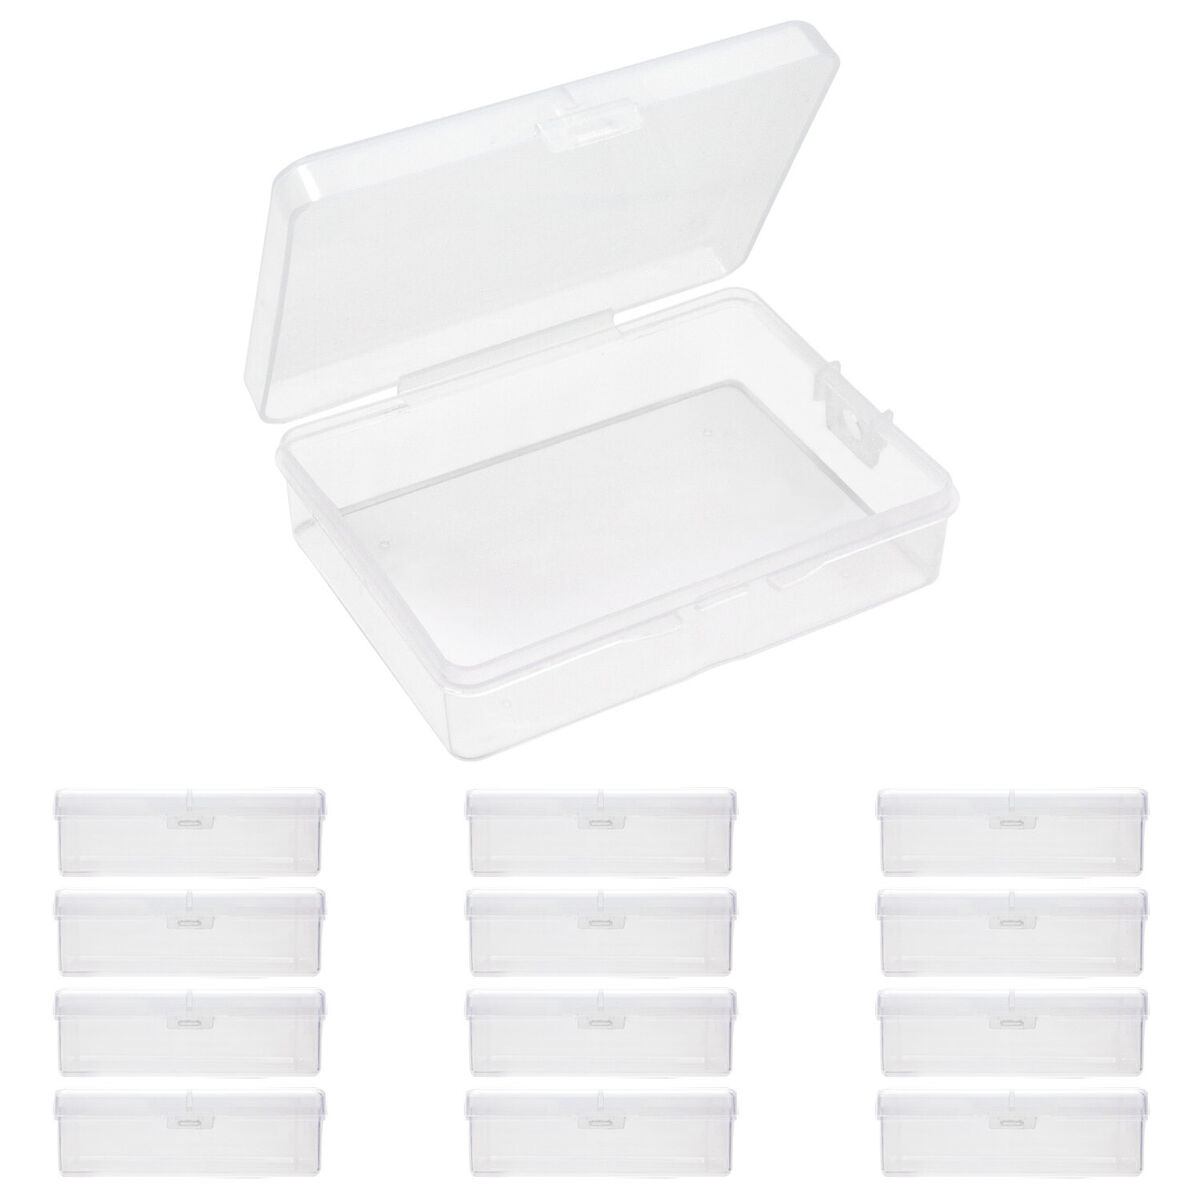 3.5x2.6x1.1 Inches Small Clear Plastic Box Storage Containers